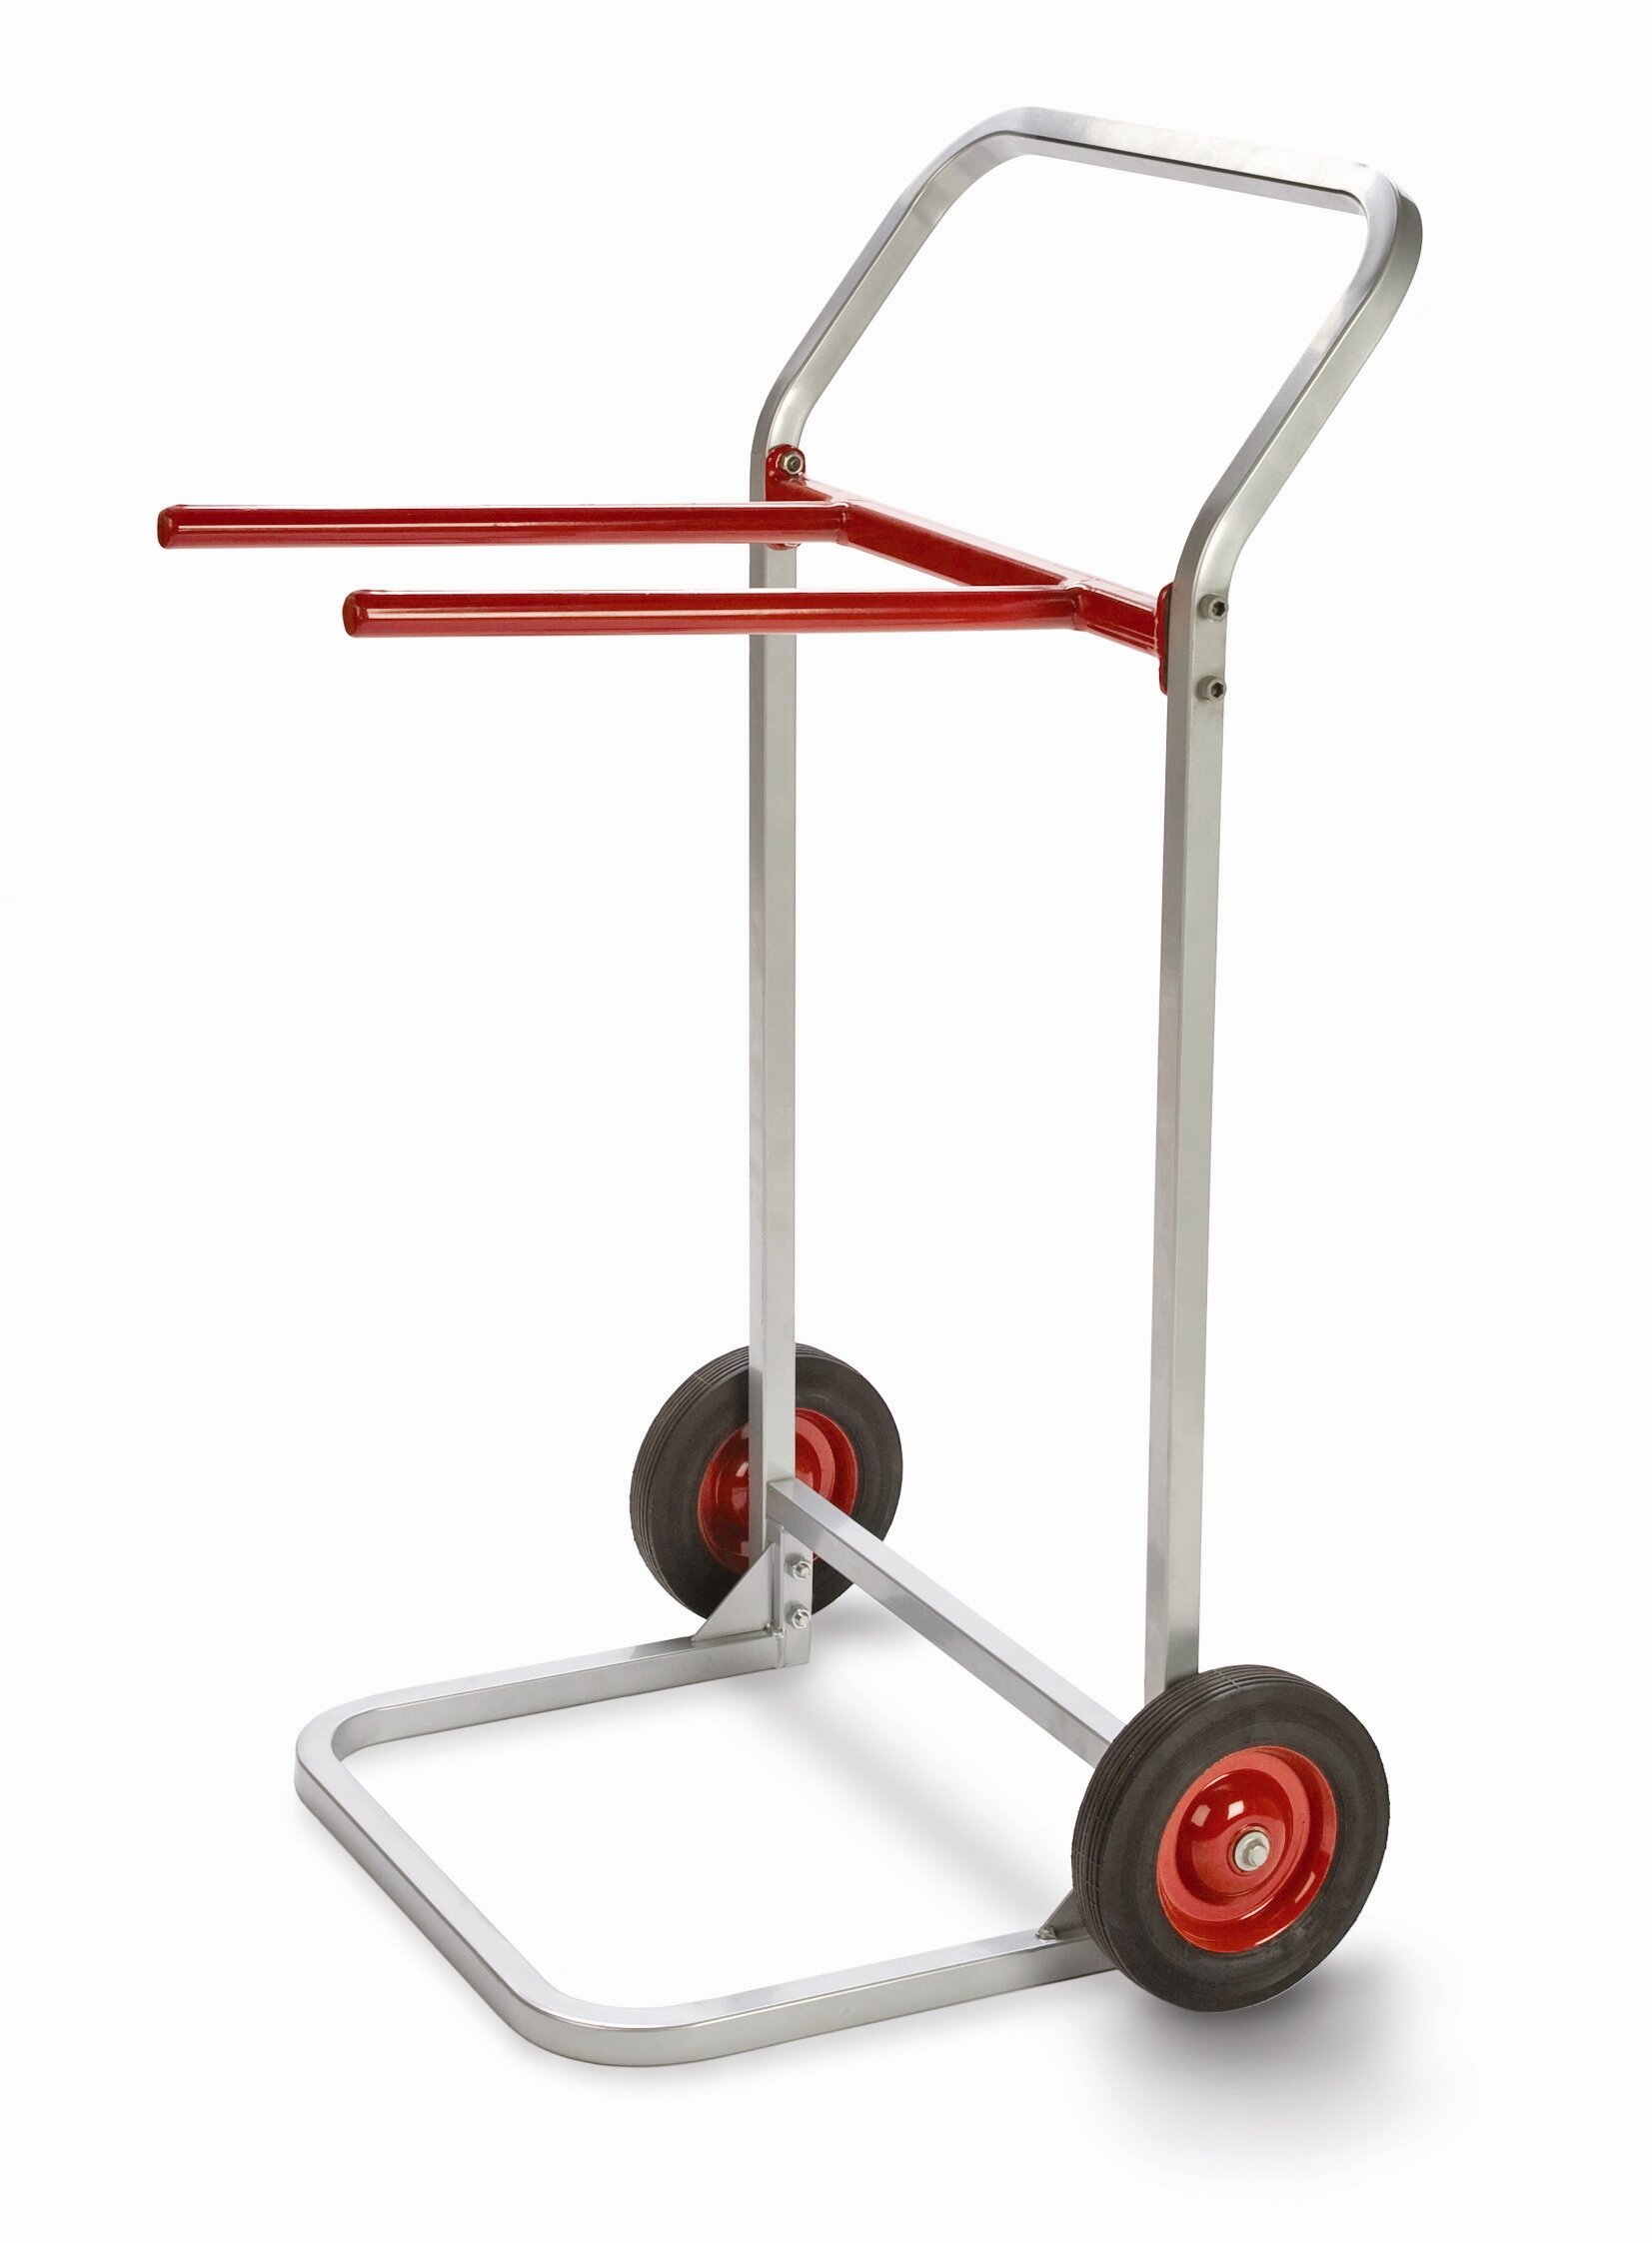 Stalwart Dolly Cart - Moving Cart with Roller Wheel Casters